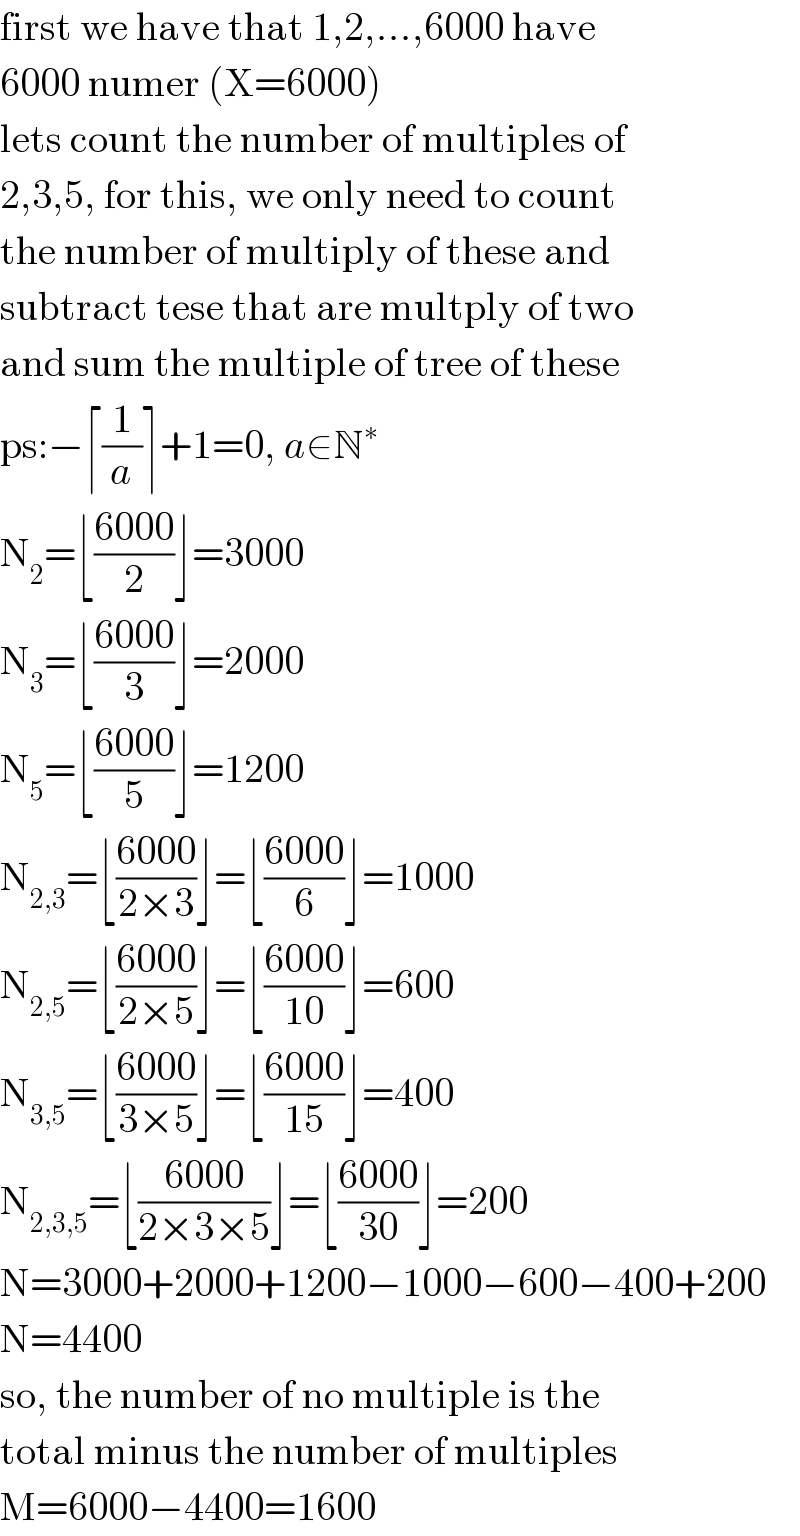 first we have that 1,2,...,6000 have  6000 numer (X=6000)  lets count the number of multiples of  2,3,5, for this, we only need to count  the number of multiply of these and  subtract tese that are multply of two  and sum the multiple of tree of these  ps:−⌈(1/a)⌉+1=0, a∈N^∗   N_2 =⌊((6000)/2)⌋=3000  N_3 =⌊((6000)/3)⌋=2000  N_5 =⌊((6000)/5)⌋=1200  N_(2,3) =⌊((6000)/(2×3))⌋=⌊((6000)/6)⌋=1000  N_(2,5) =⌊((6000)/(2×5))⌋=⌊((6000)/(10))⌋=600  N_(3,5) =⌊((6000)/(3×5))⌋=⌊((6000)/(15))⌋=400  N_(2,3,5) =⌊((6000)/(2×3×5))⌋=⌊((6000)/(30))⌋=200  N=3000+2000+1200−1000−600−400+200  N=4400  so, the number of no multiple is the  total minus the number of multiples  M=6000−4400=1600  